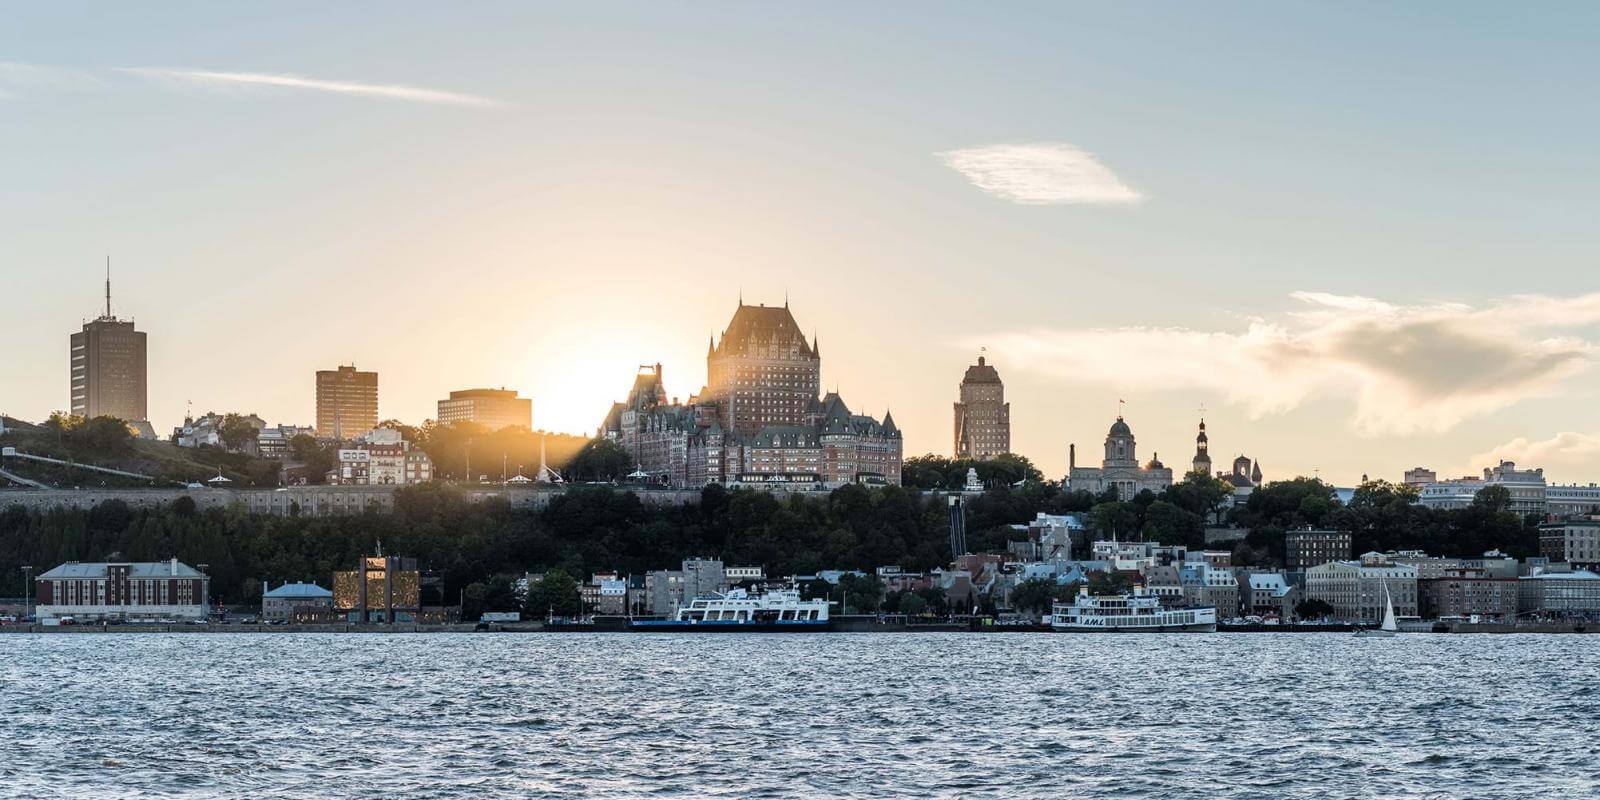 Sunset and panoramic view of Old Québec, from Lévis in summer.